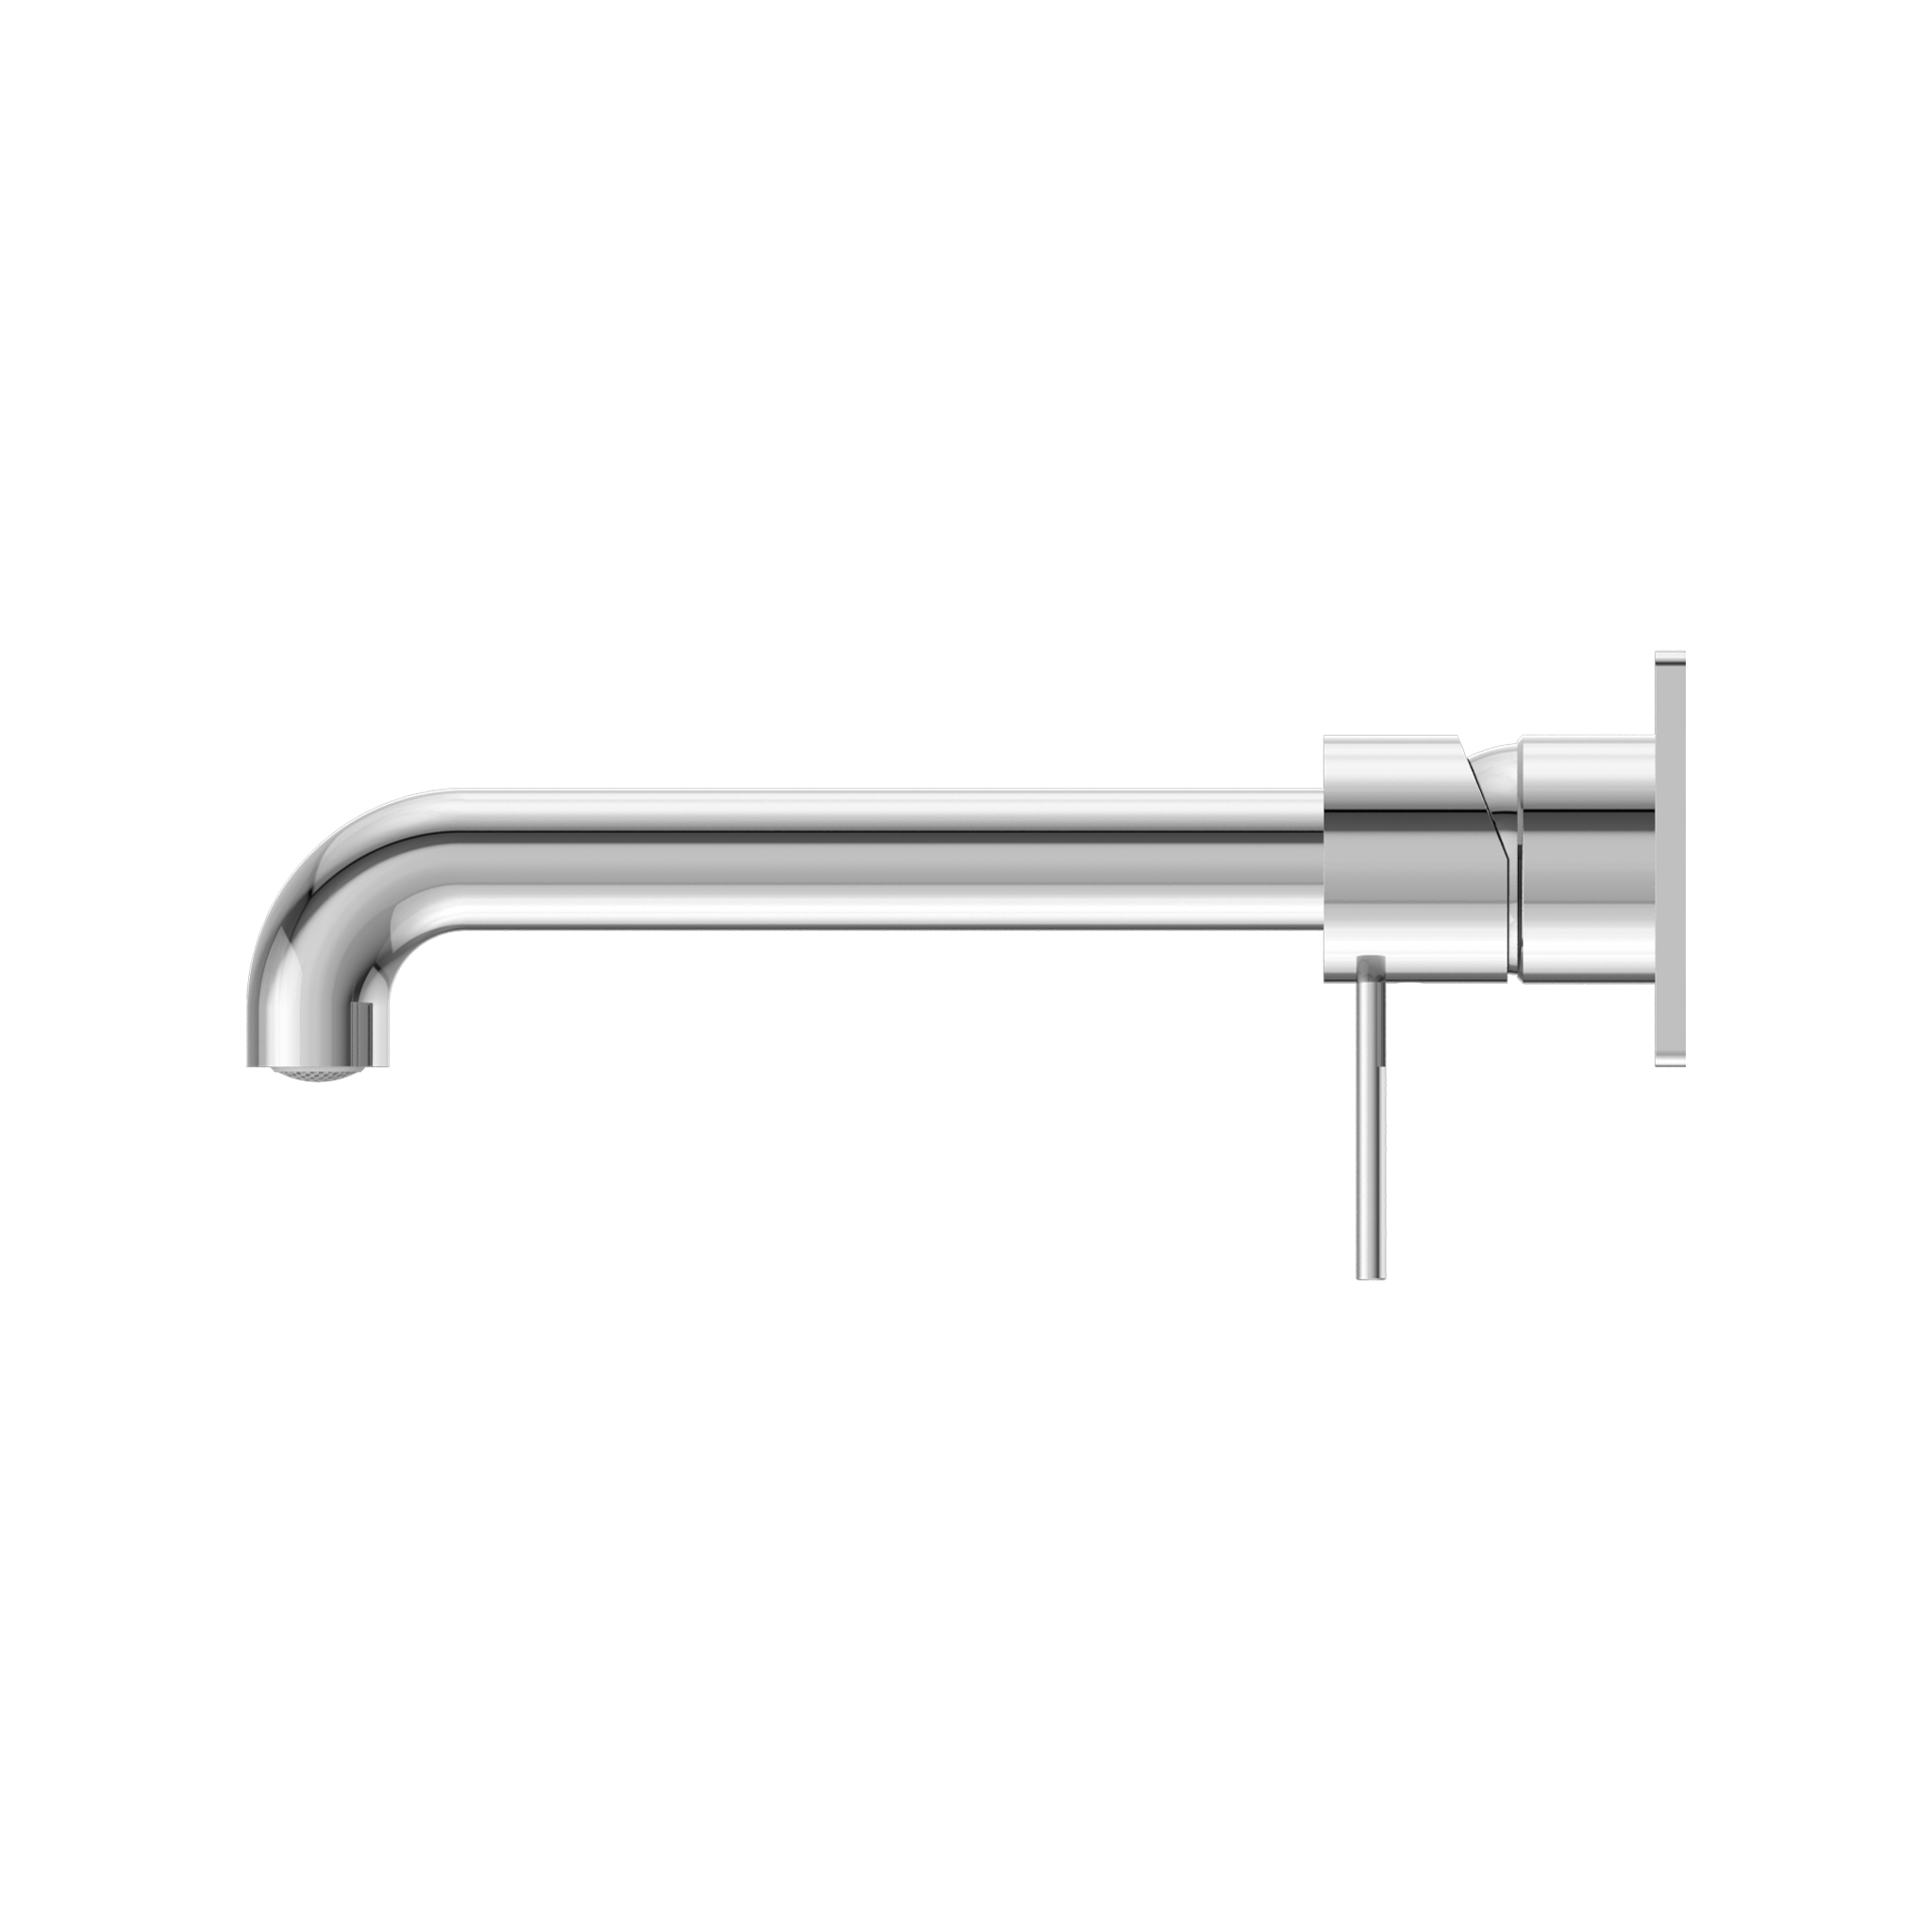 NERO MECCA WALL BASIN/ BATH MIXER CHROME (AVAILABLE IN 120MM, 160MM, 185MM, 230MM AND 260MM)